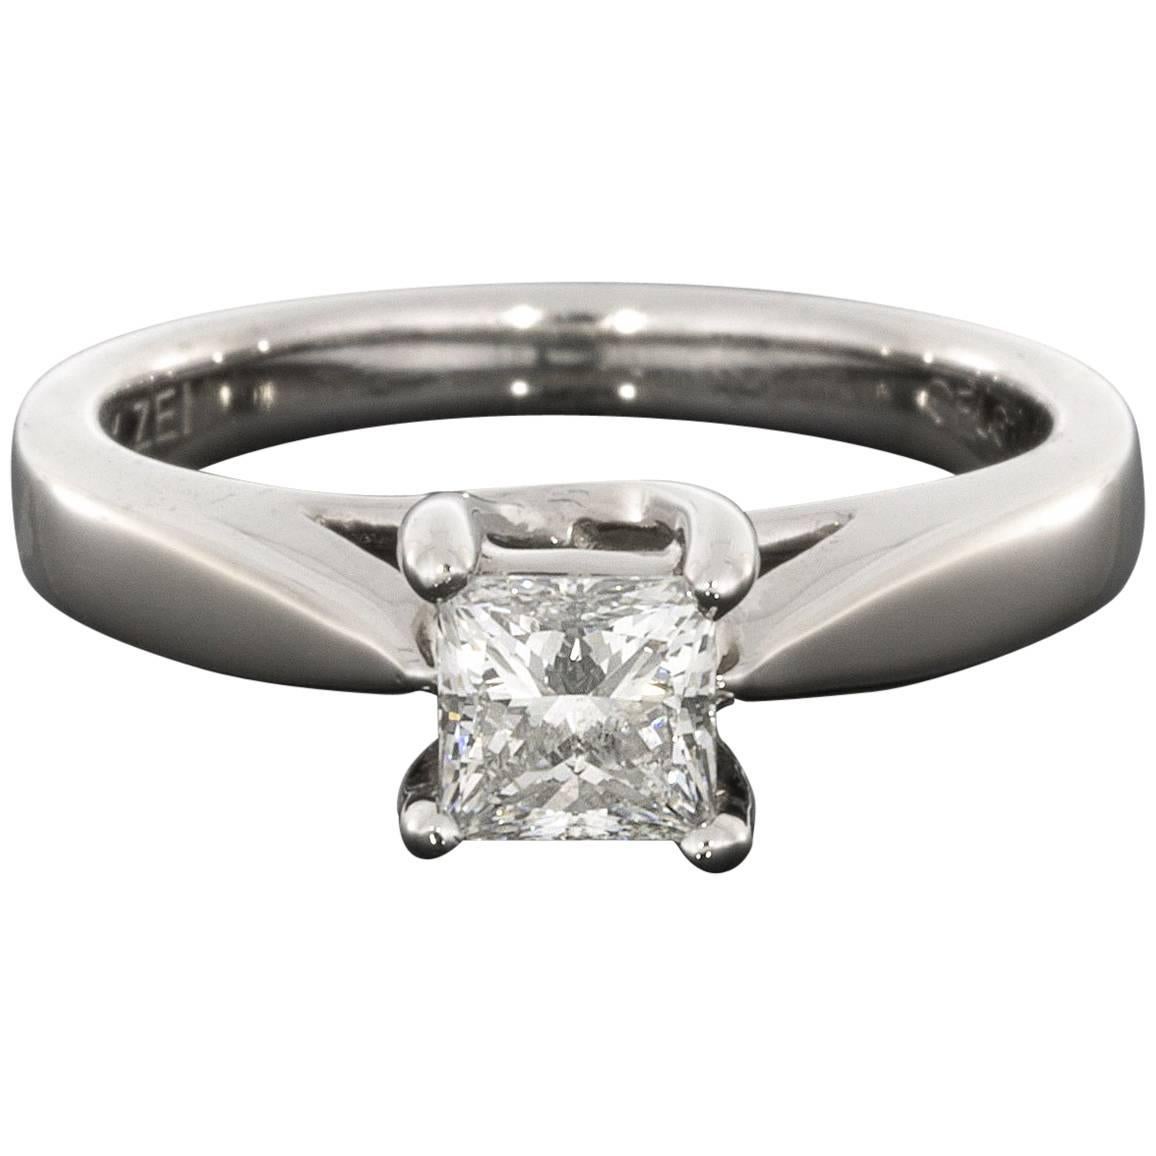 Ideal Princess Diamond Celebration Grand Certified Solitaire Engagement Ring